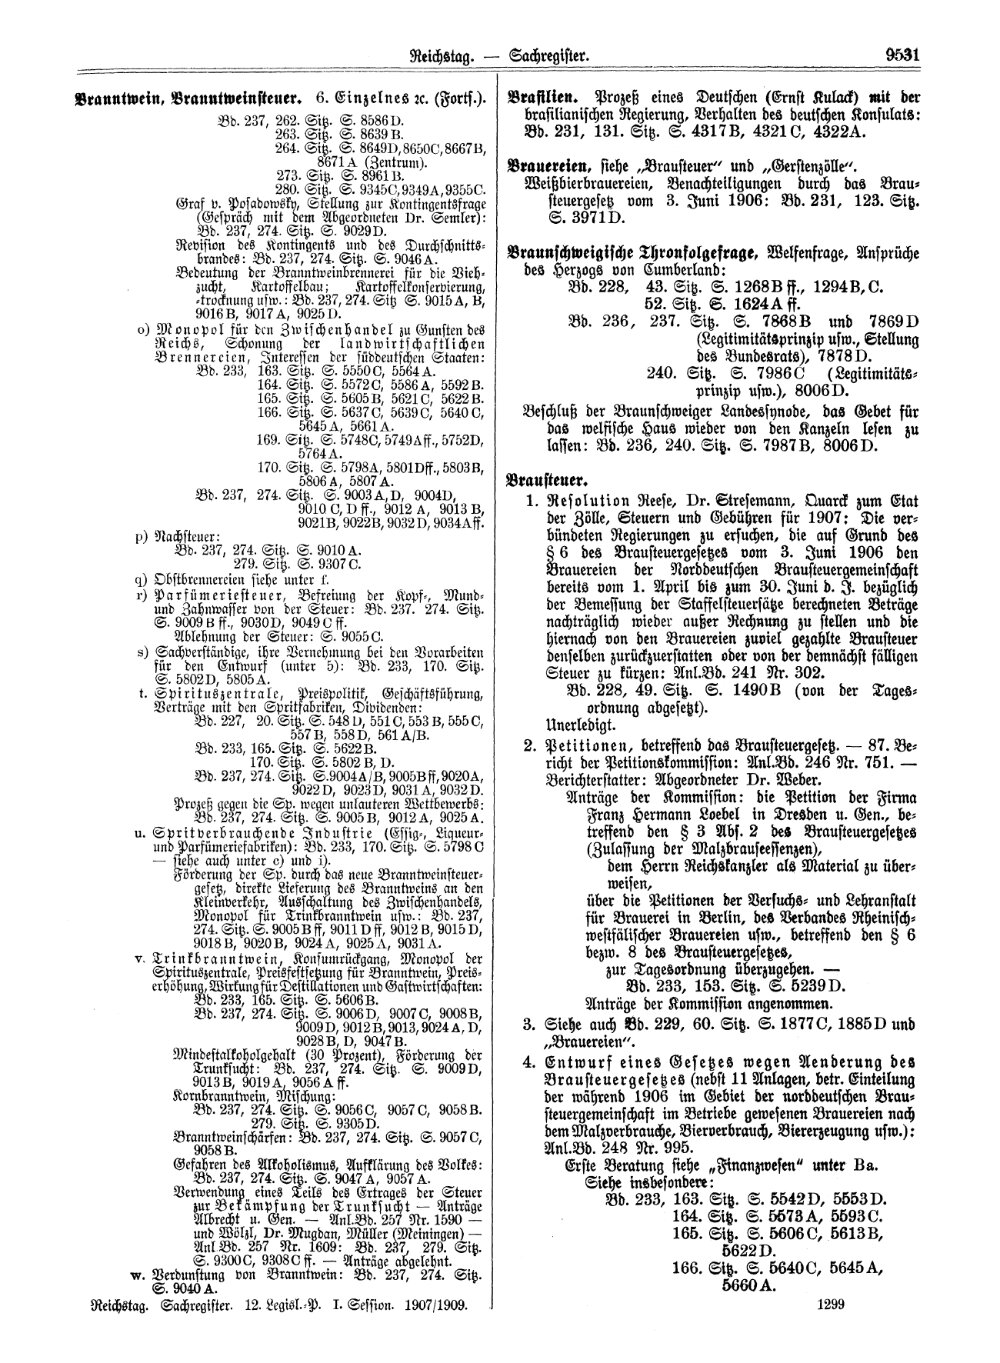 Scan of page 9531